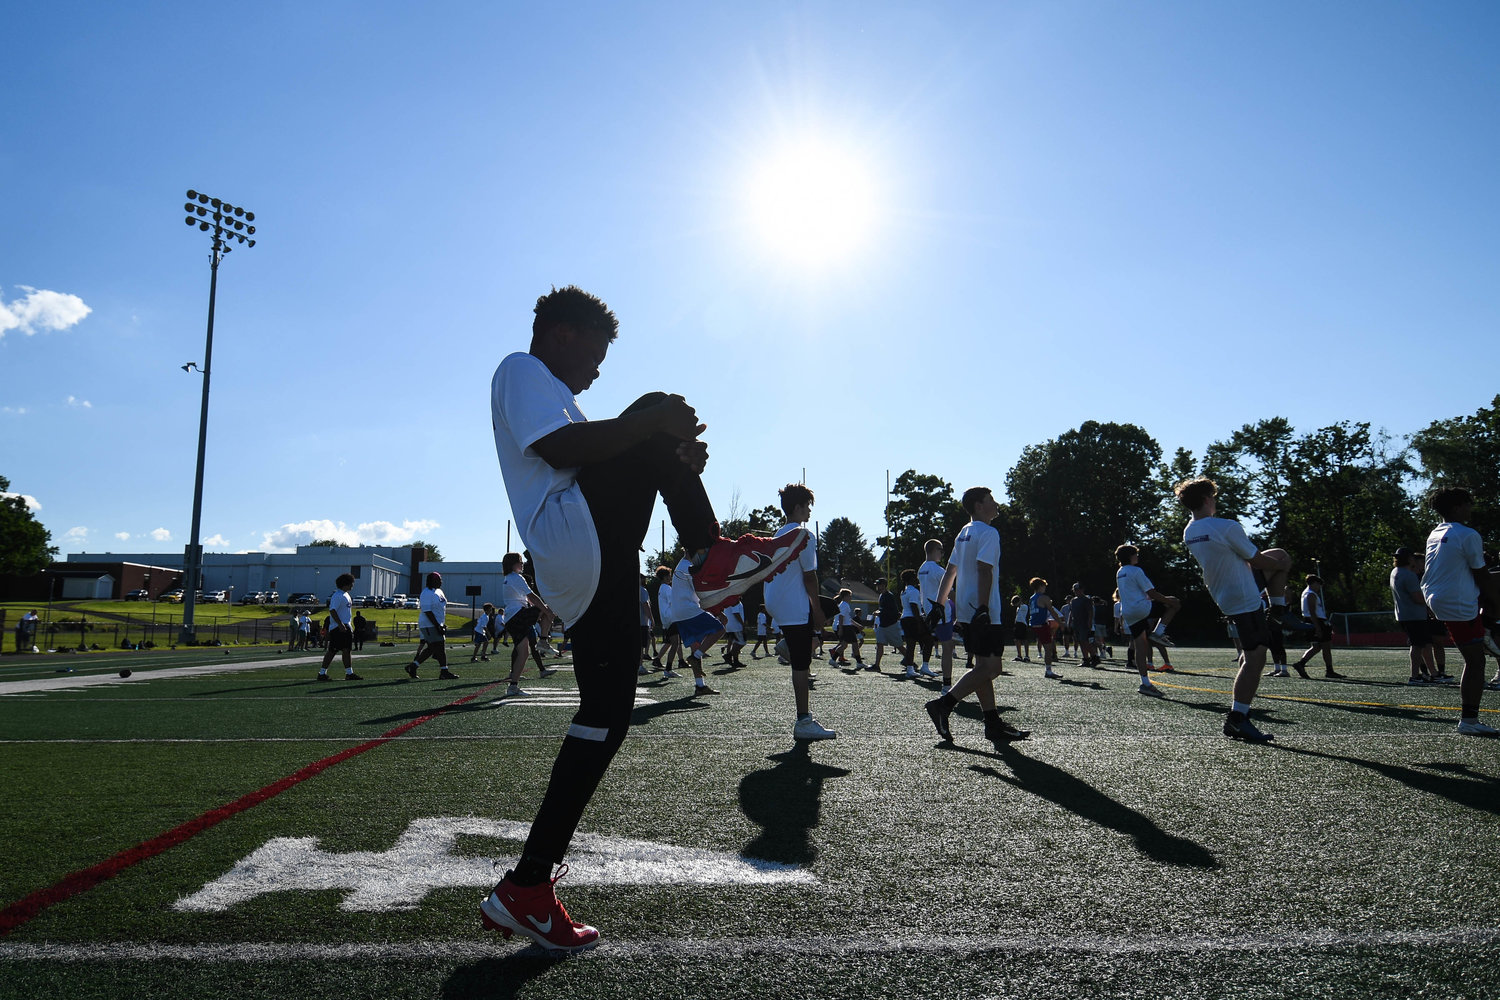 WARMING UP — Teen athletes warm up on the field during the fifth annual "A Call to Men" football camp on Tuesday at Charles A. Gaetano Stadium at Utica University.